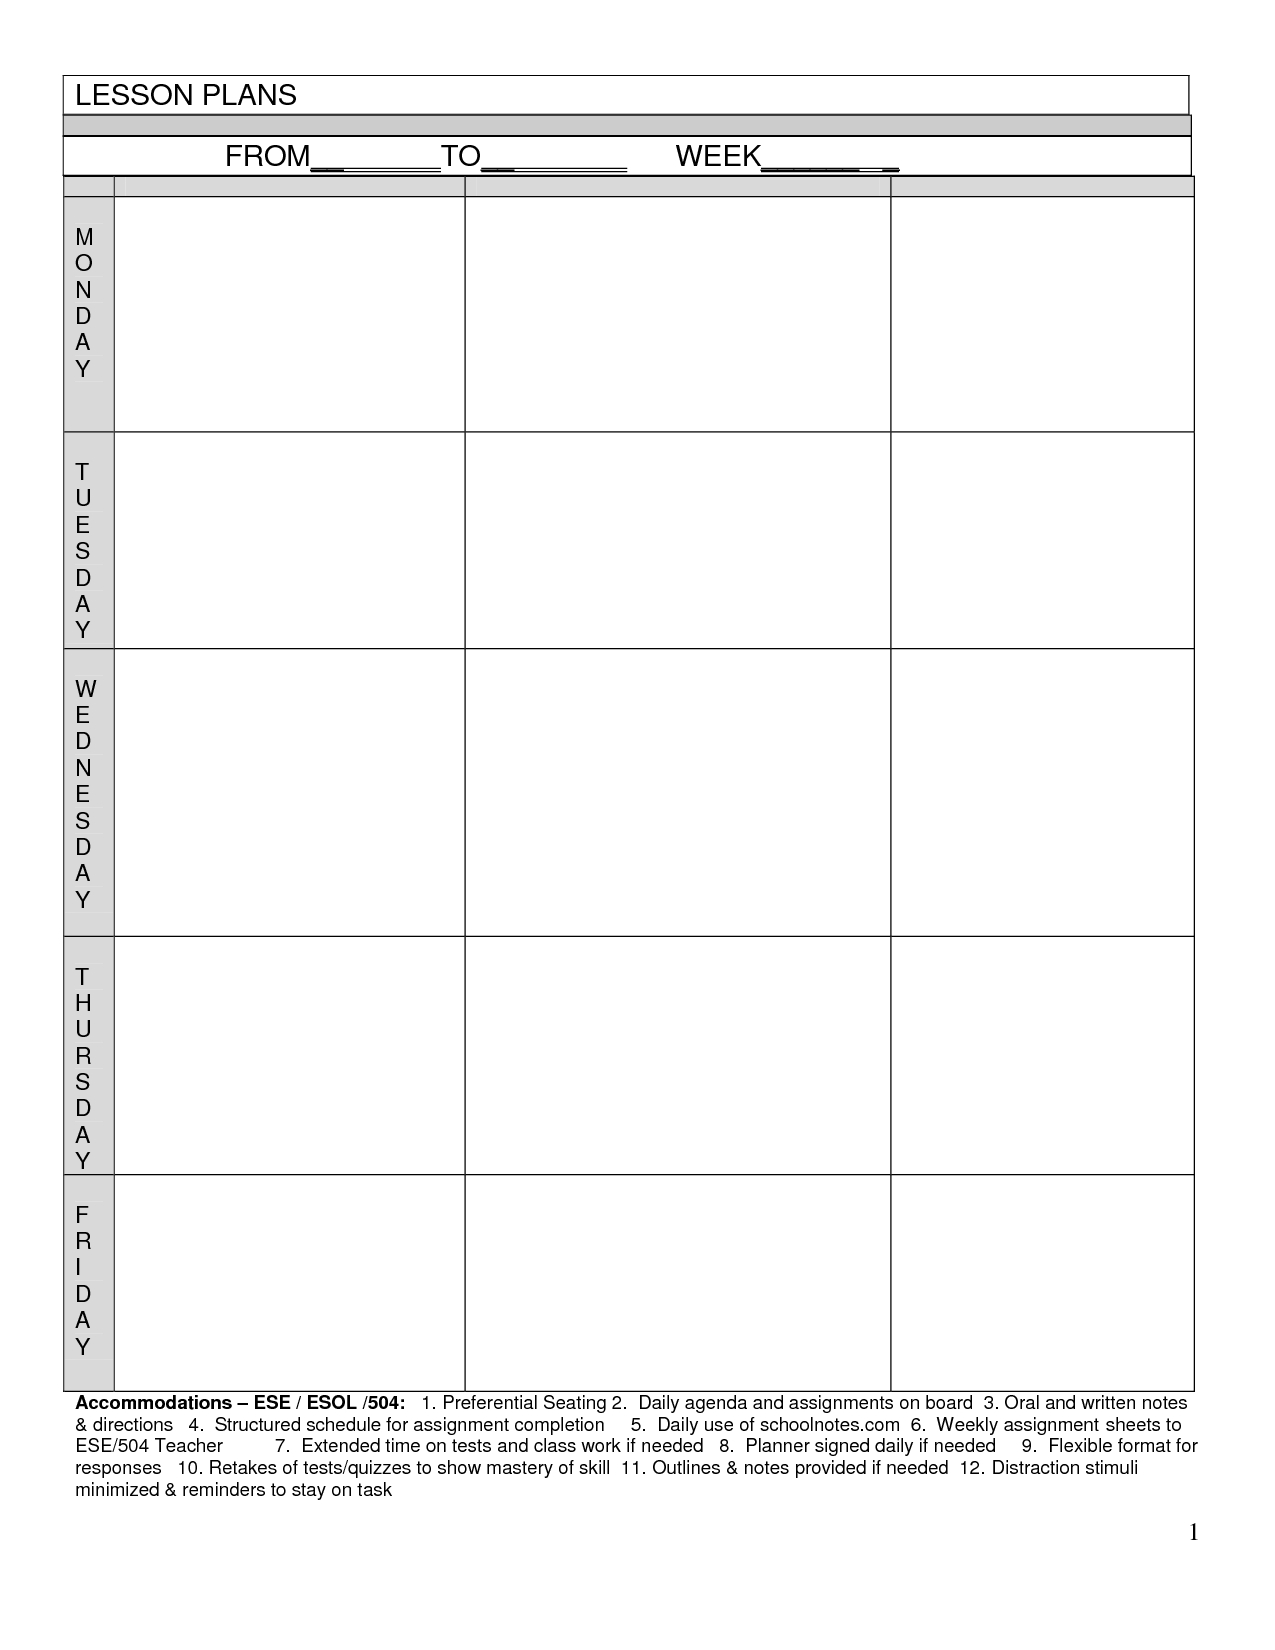 Blank Lesson Plans For Teachers | Free Printable Blank Preschool - Free Printable Blank Lesson Plan Pages